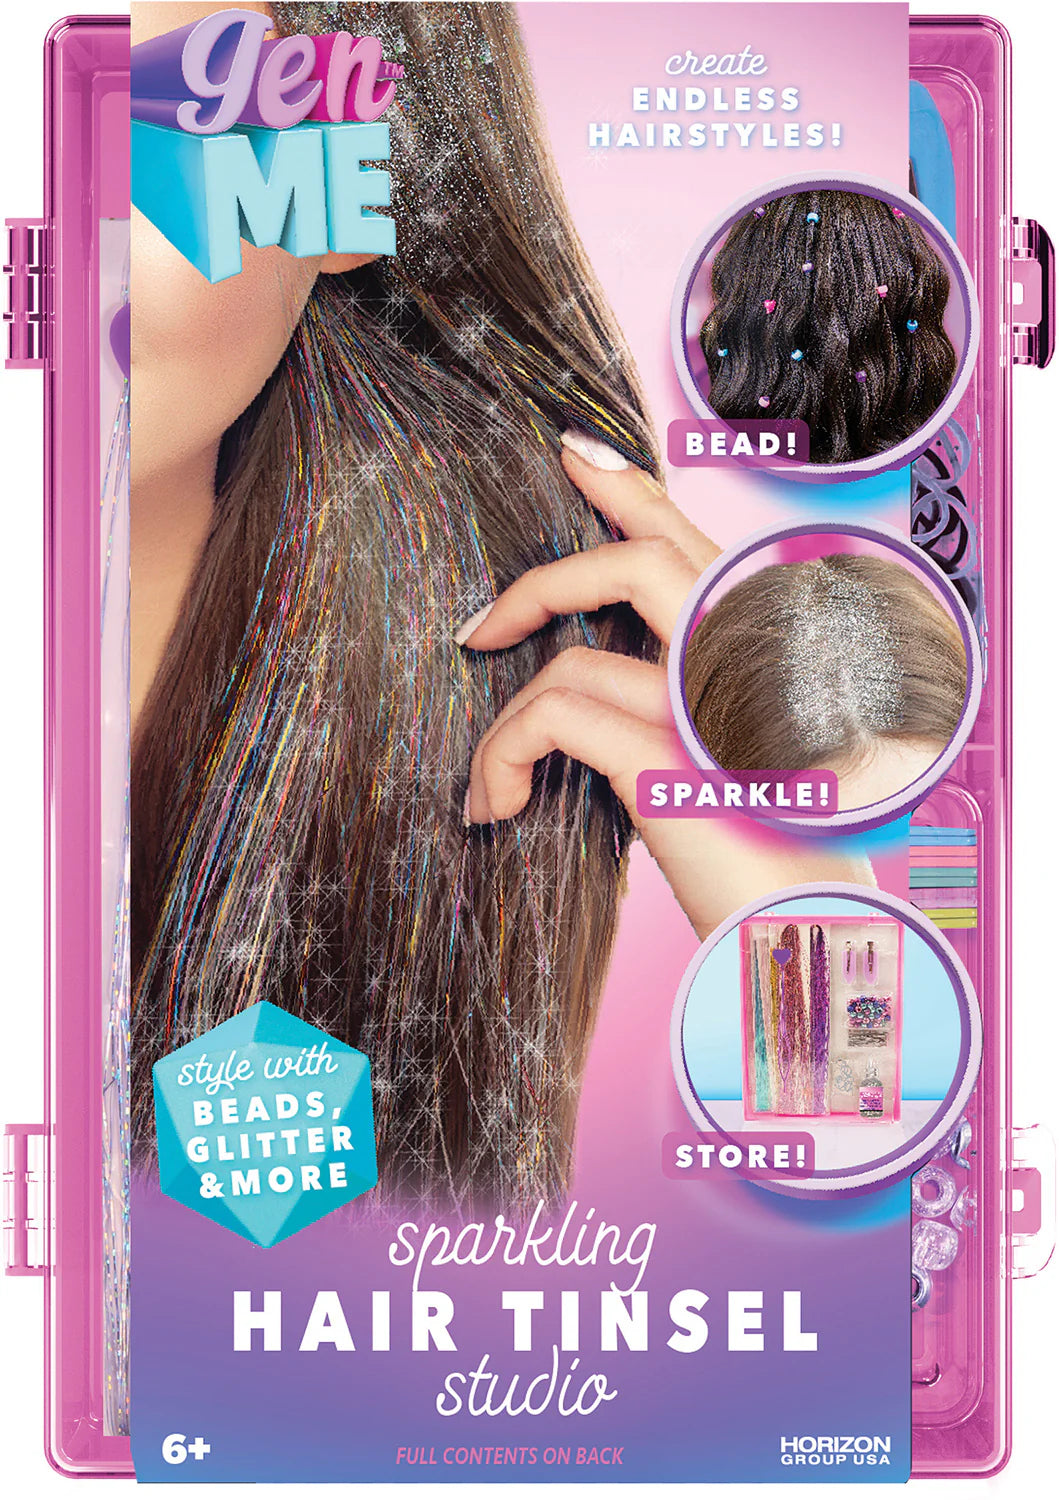 Genme Hair Tinsel Studio Cover